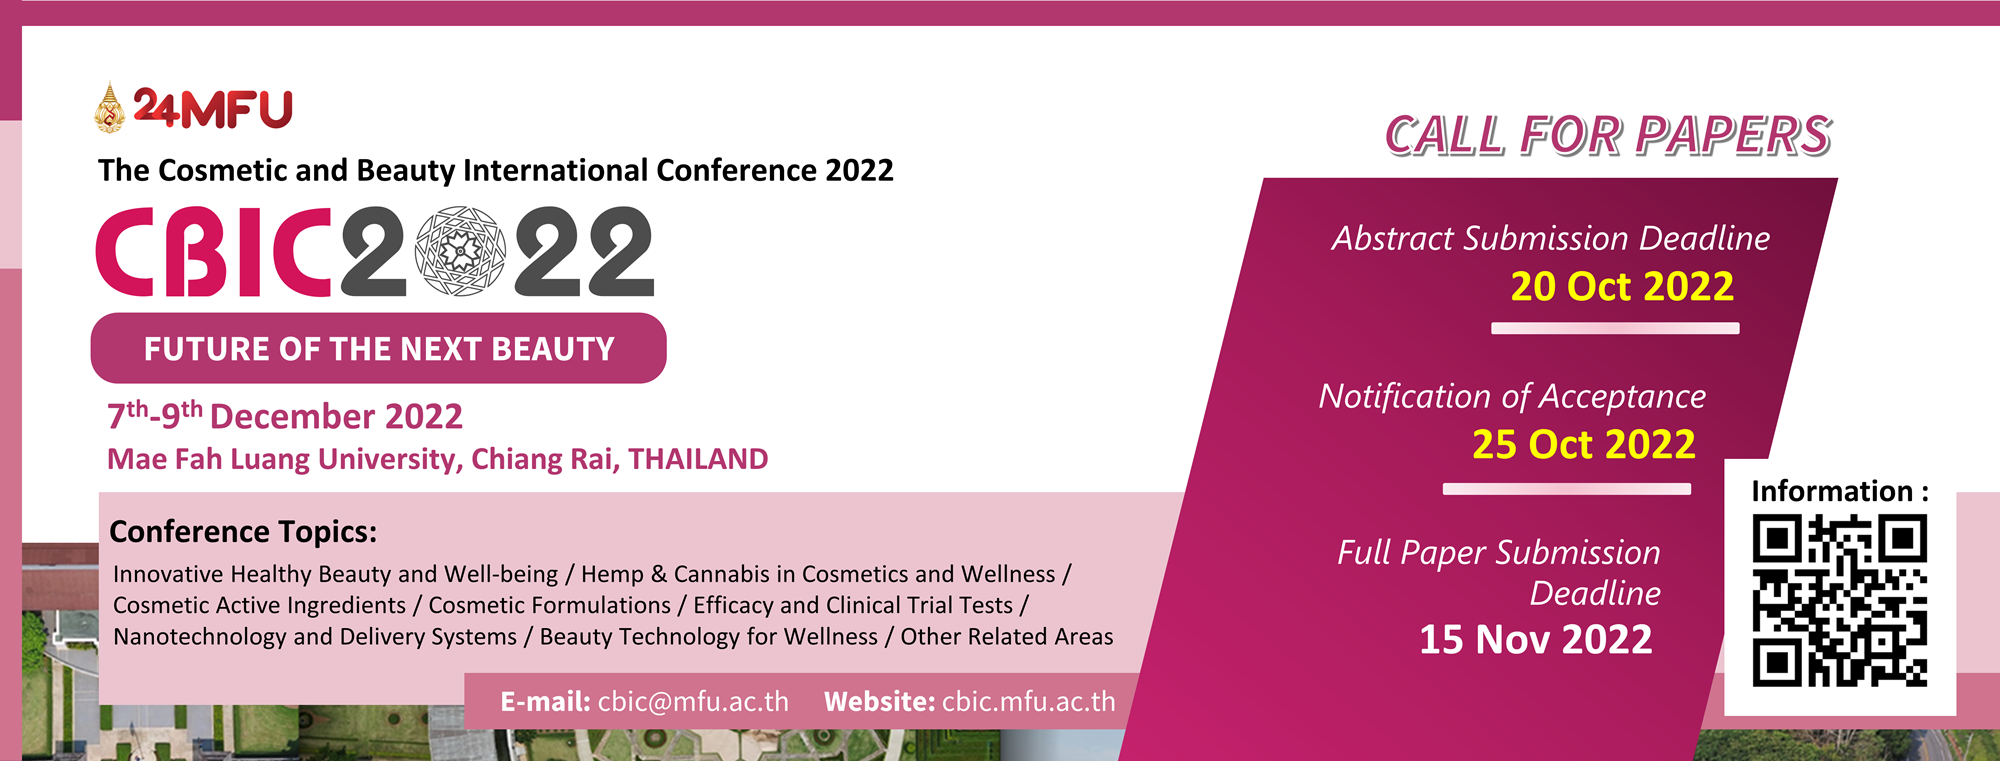 Call for Abstract Submission: The Cosmetic and Beauty International Conference 2022: Future of the Next Beauty (CBIC 2022)